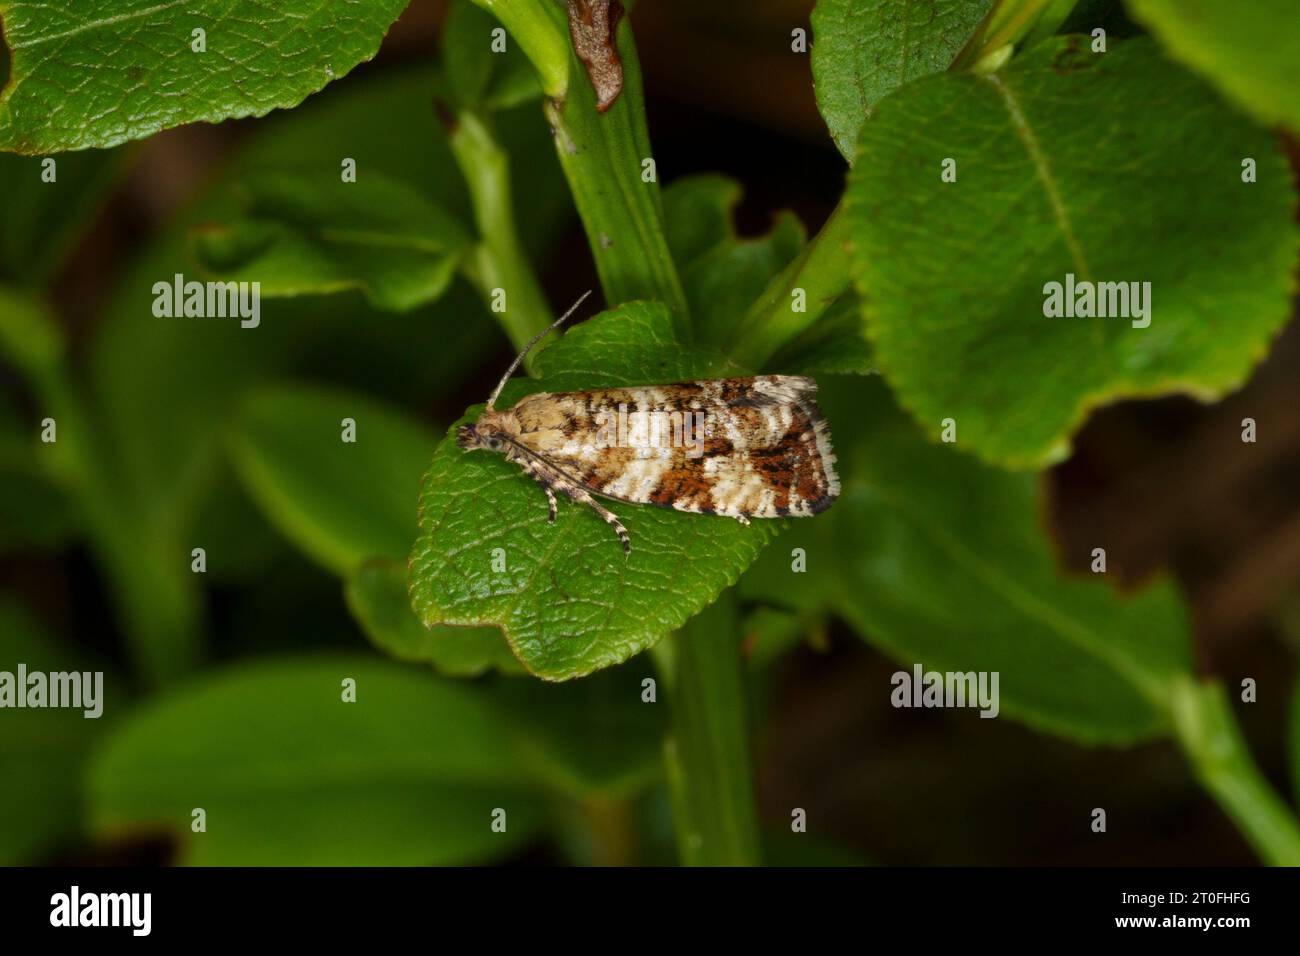 Phiaris palustrana Olethreutes palustrana Family Tortricidae Genus Olethreutes Northern marble moth wild nature insect photography, picture, wallpaper Stock Photo